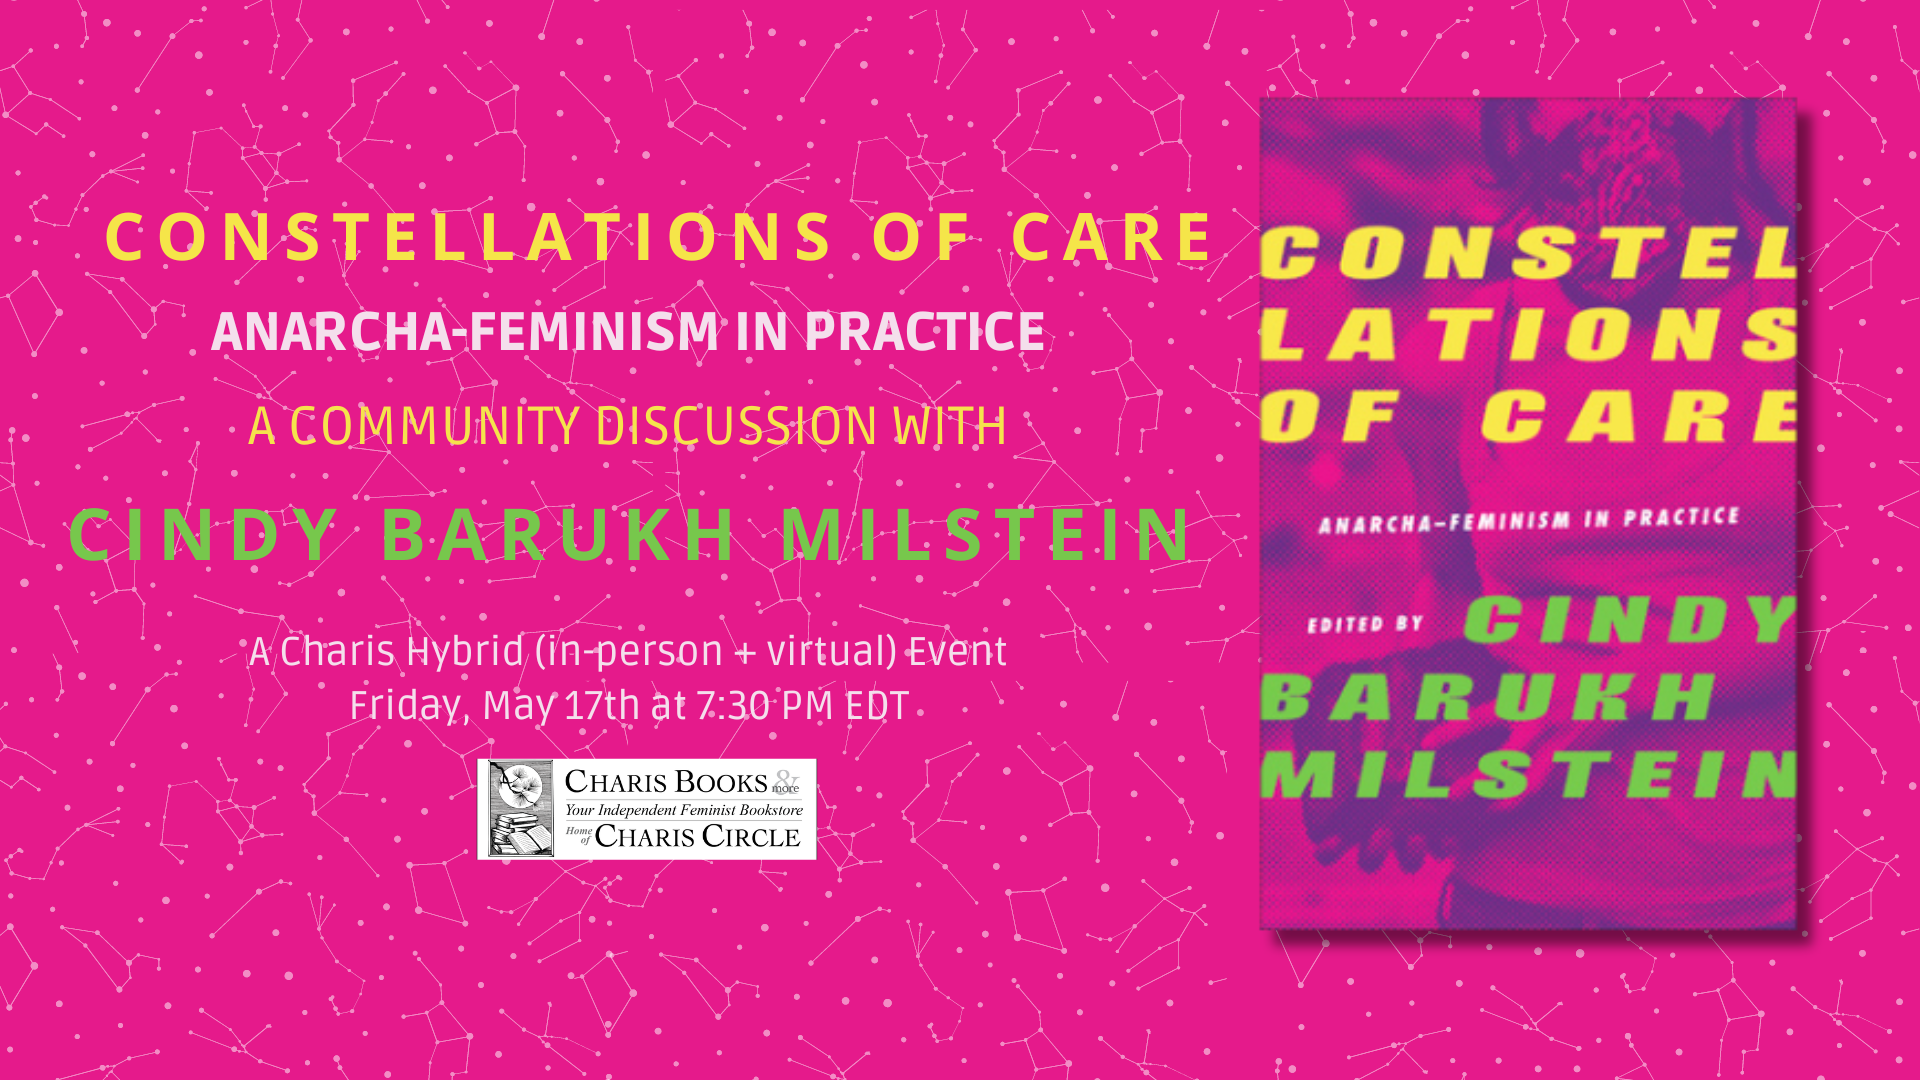 Constellations of Care: Anarcha-Feminism in Practice--A Community Discussion with Cindy Barukh Milstein event cover photo